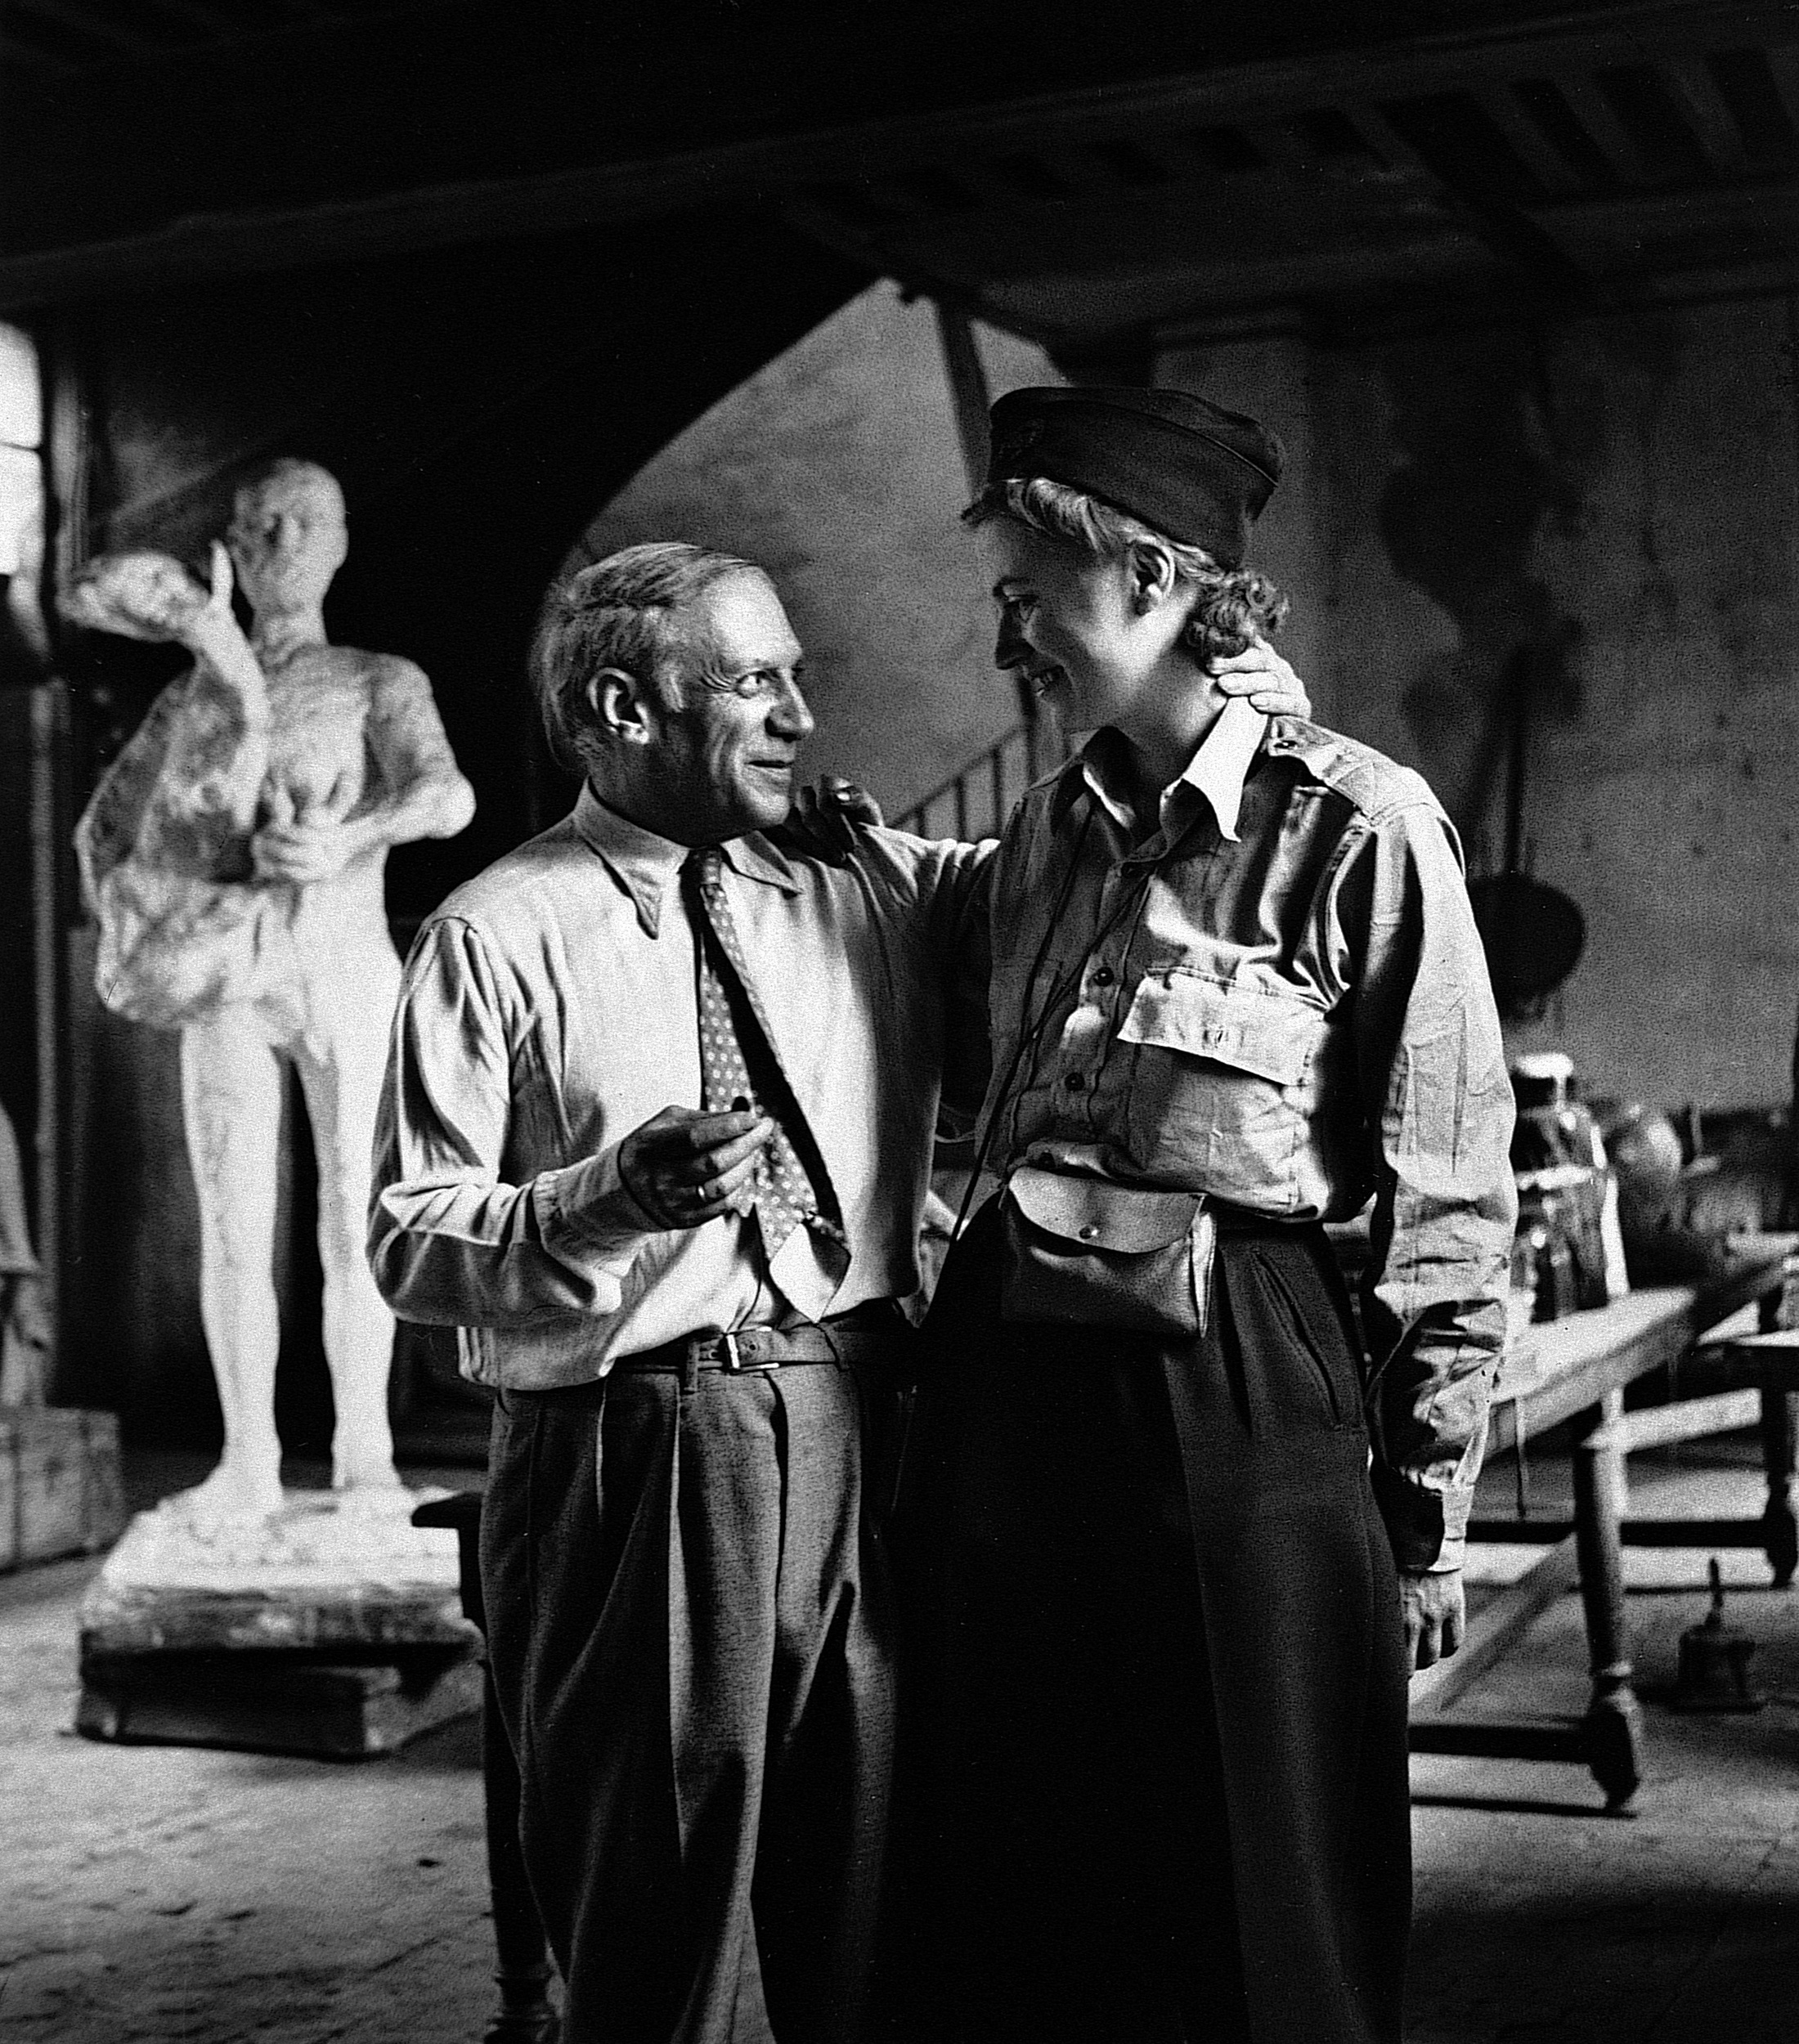 Lee Miller and Picasso after the liberation of Paris, France